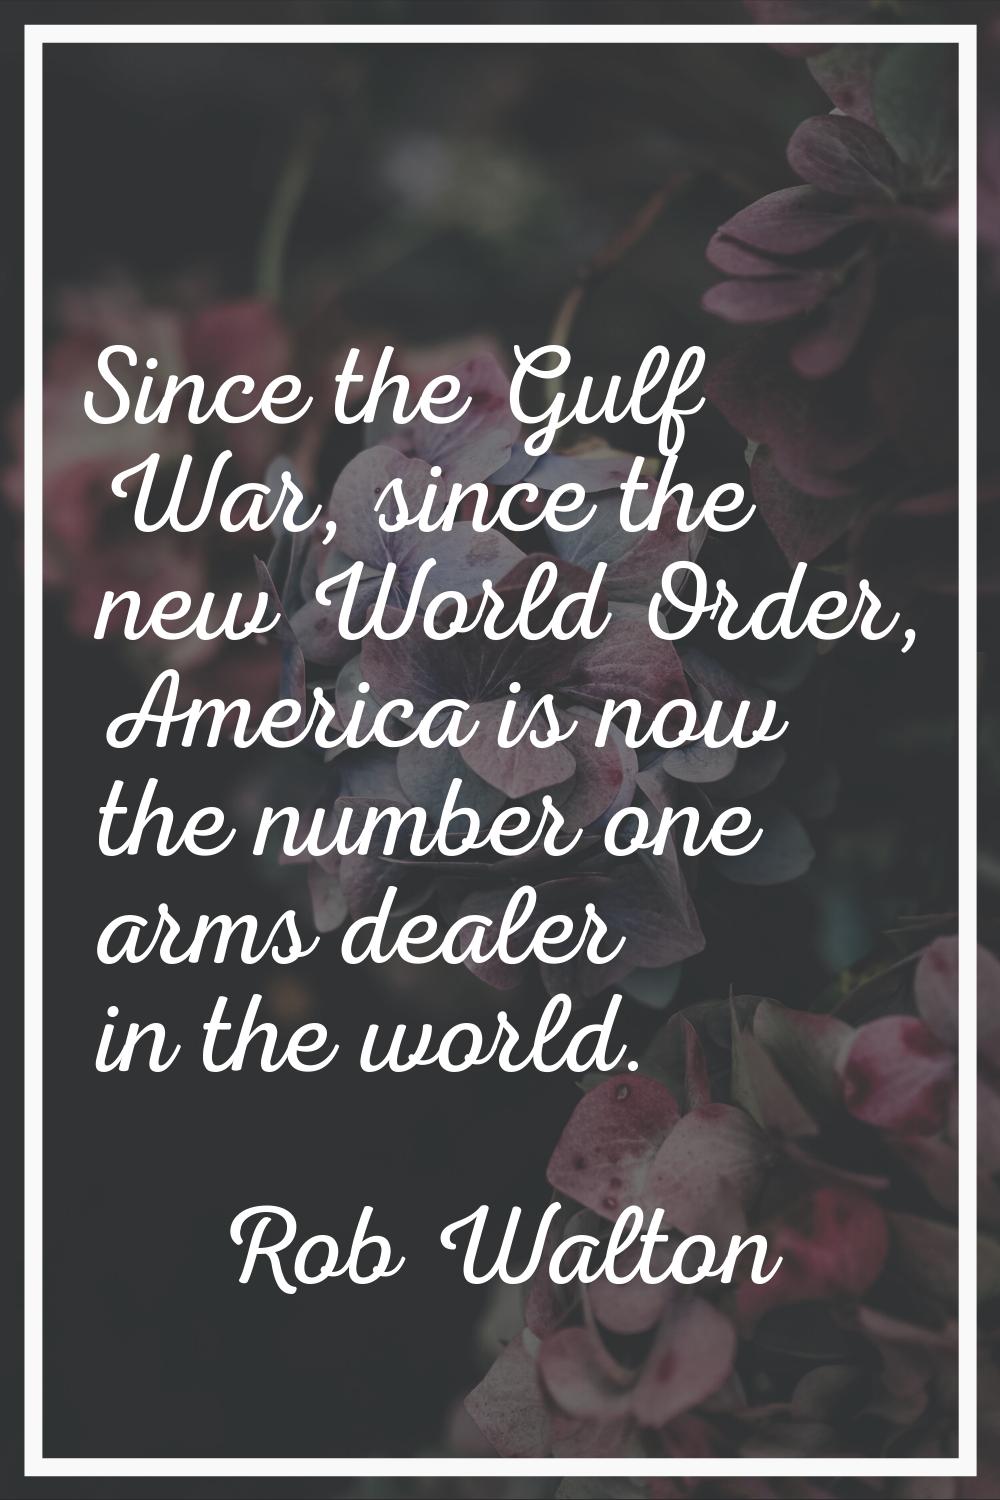 Since the Gulf War, since the new World Order, America is now the number one arms dealer in the wor